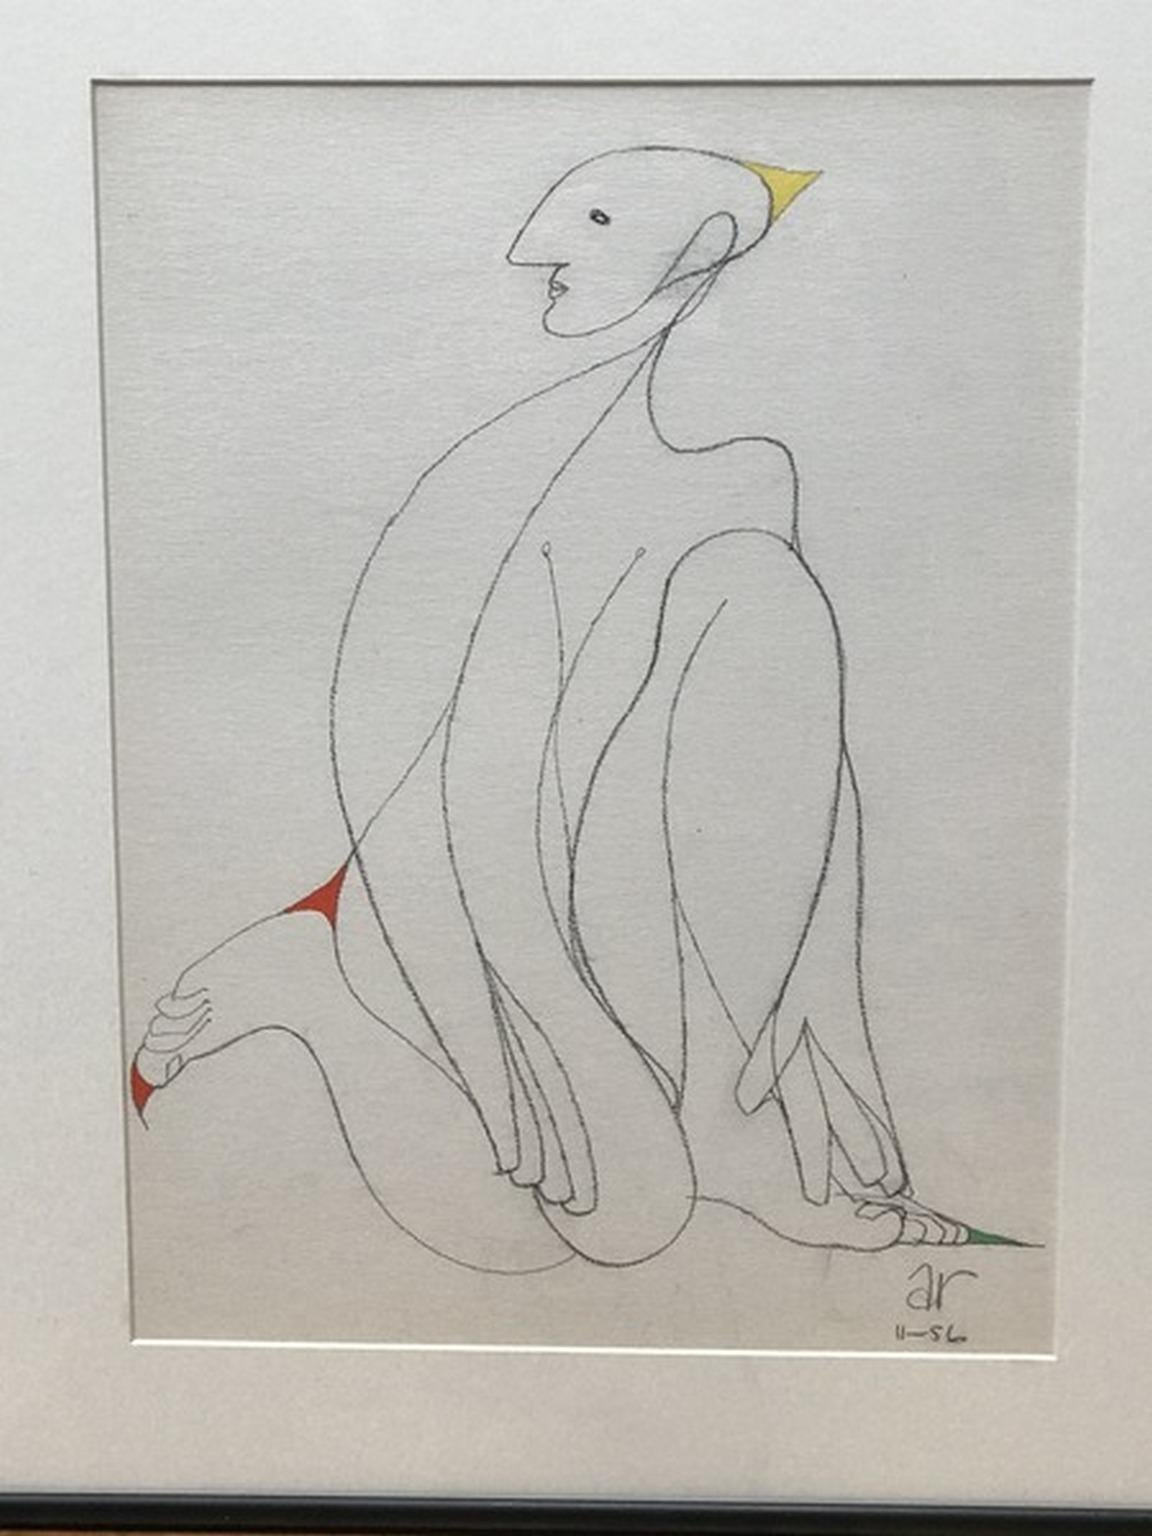 A single-line drawing featuring an odd man sitting by Albert Radoczy. Signed and dated 1956.
Part of a study of 3 but can be sold individually.

Albert Radoczy was a master at exploring the female form. Throughout his career, his drawings and